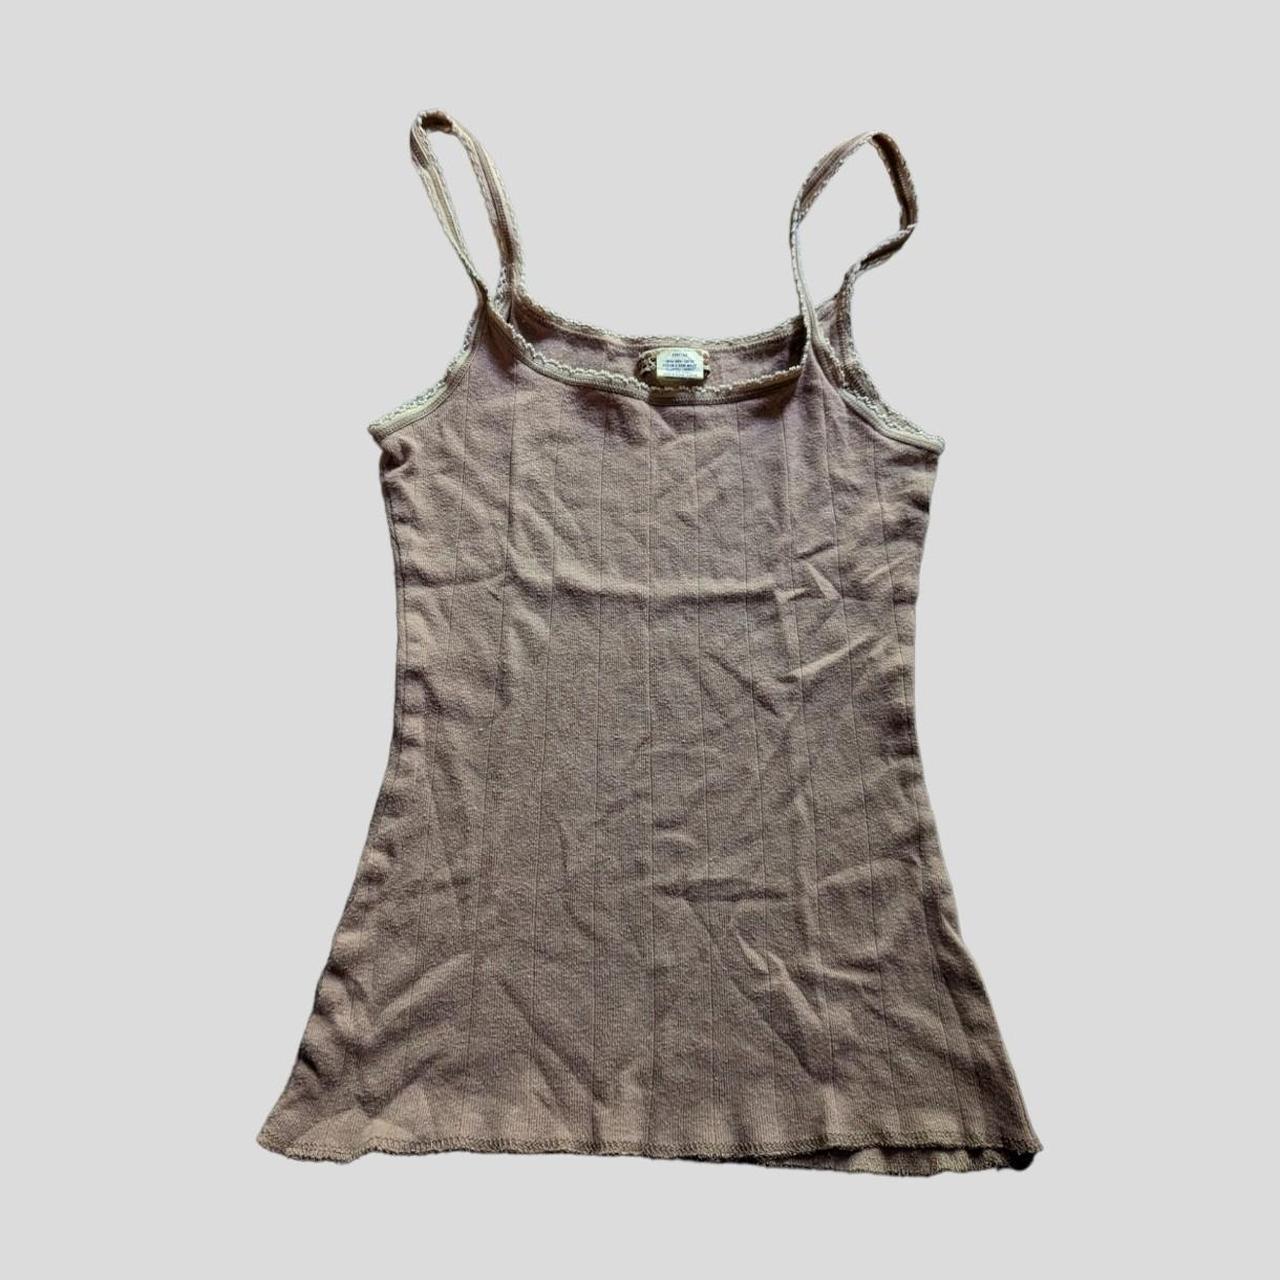 Abercrombie & Fitch Women's Brown and Cream Vest | Depop